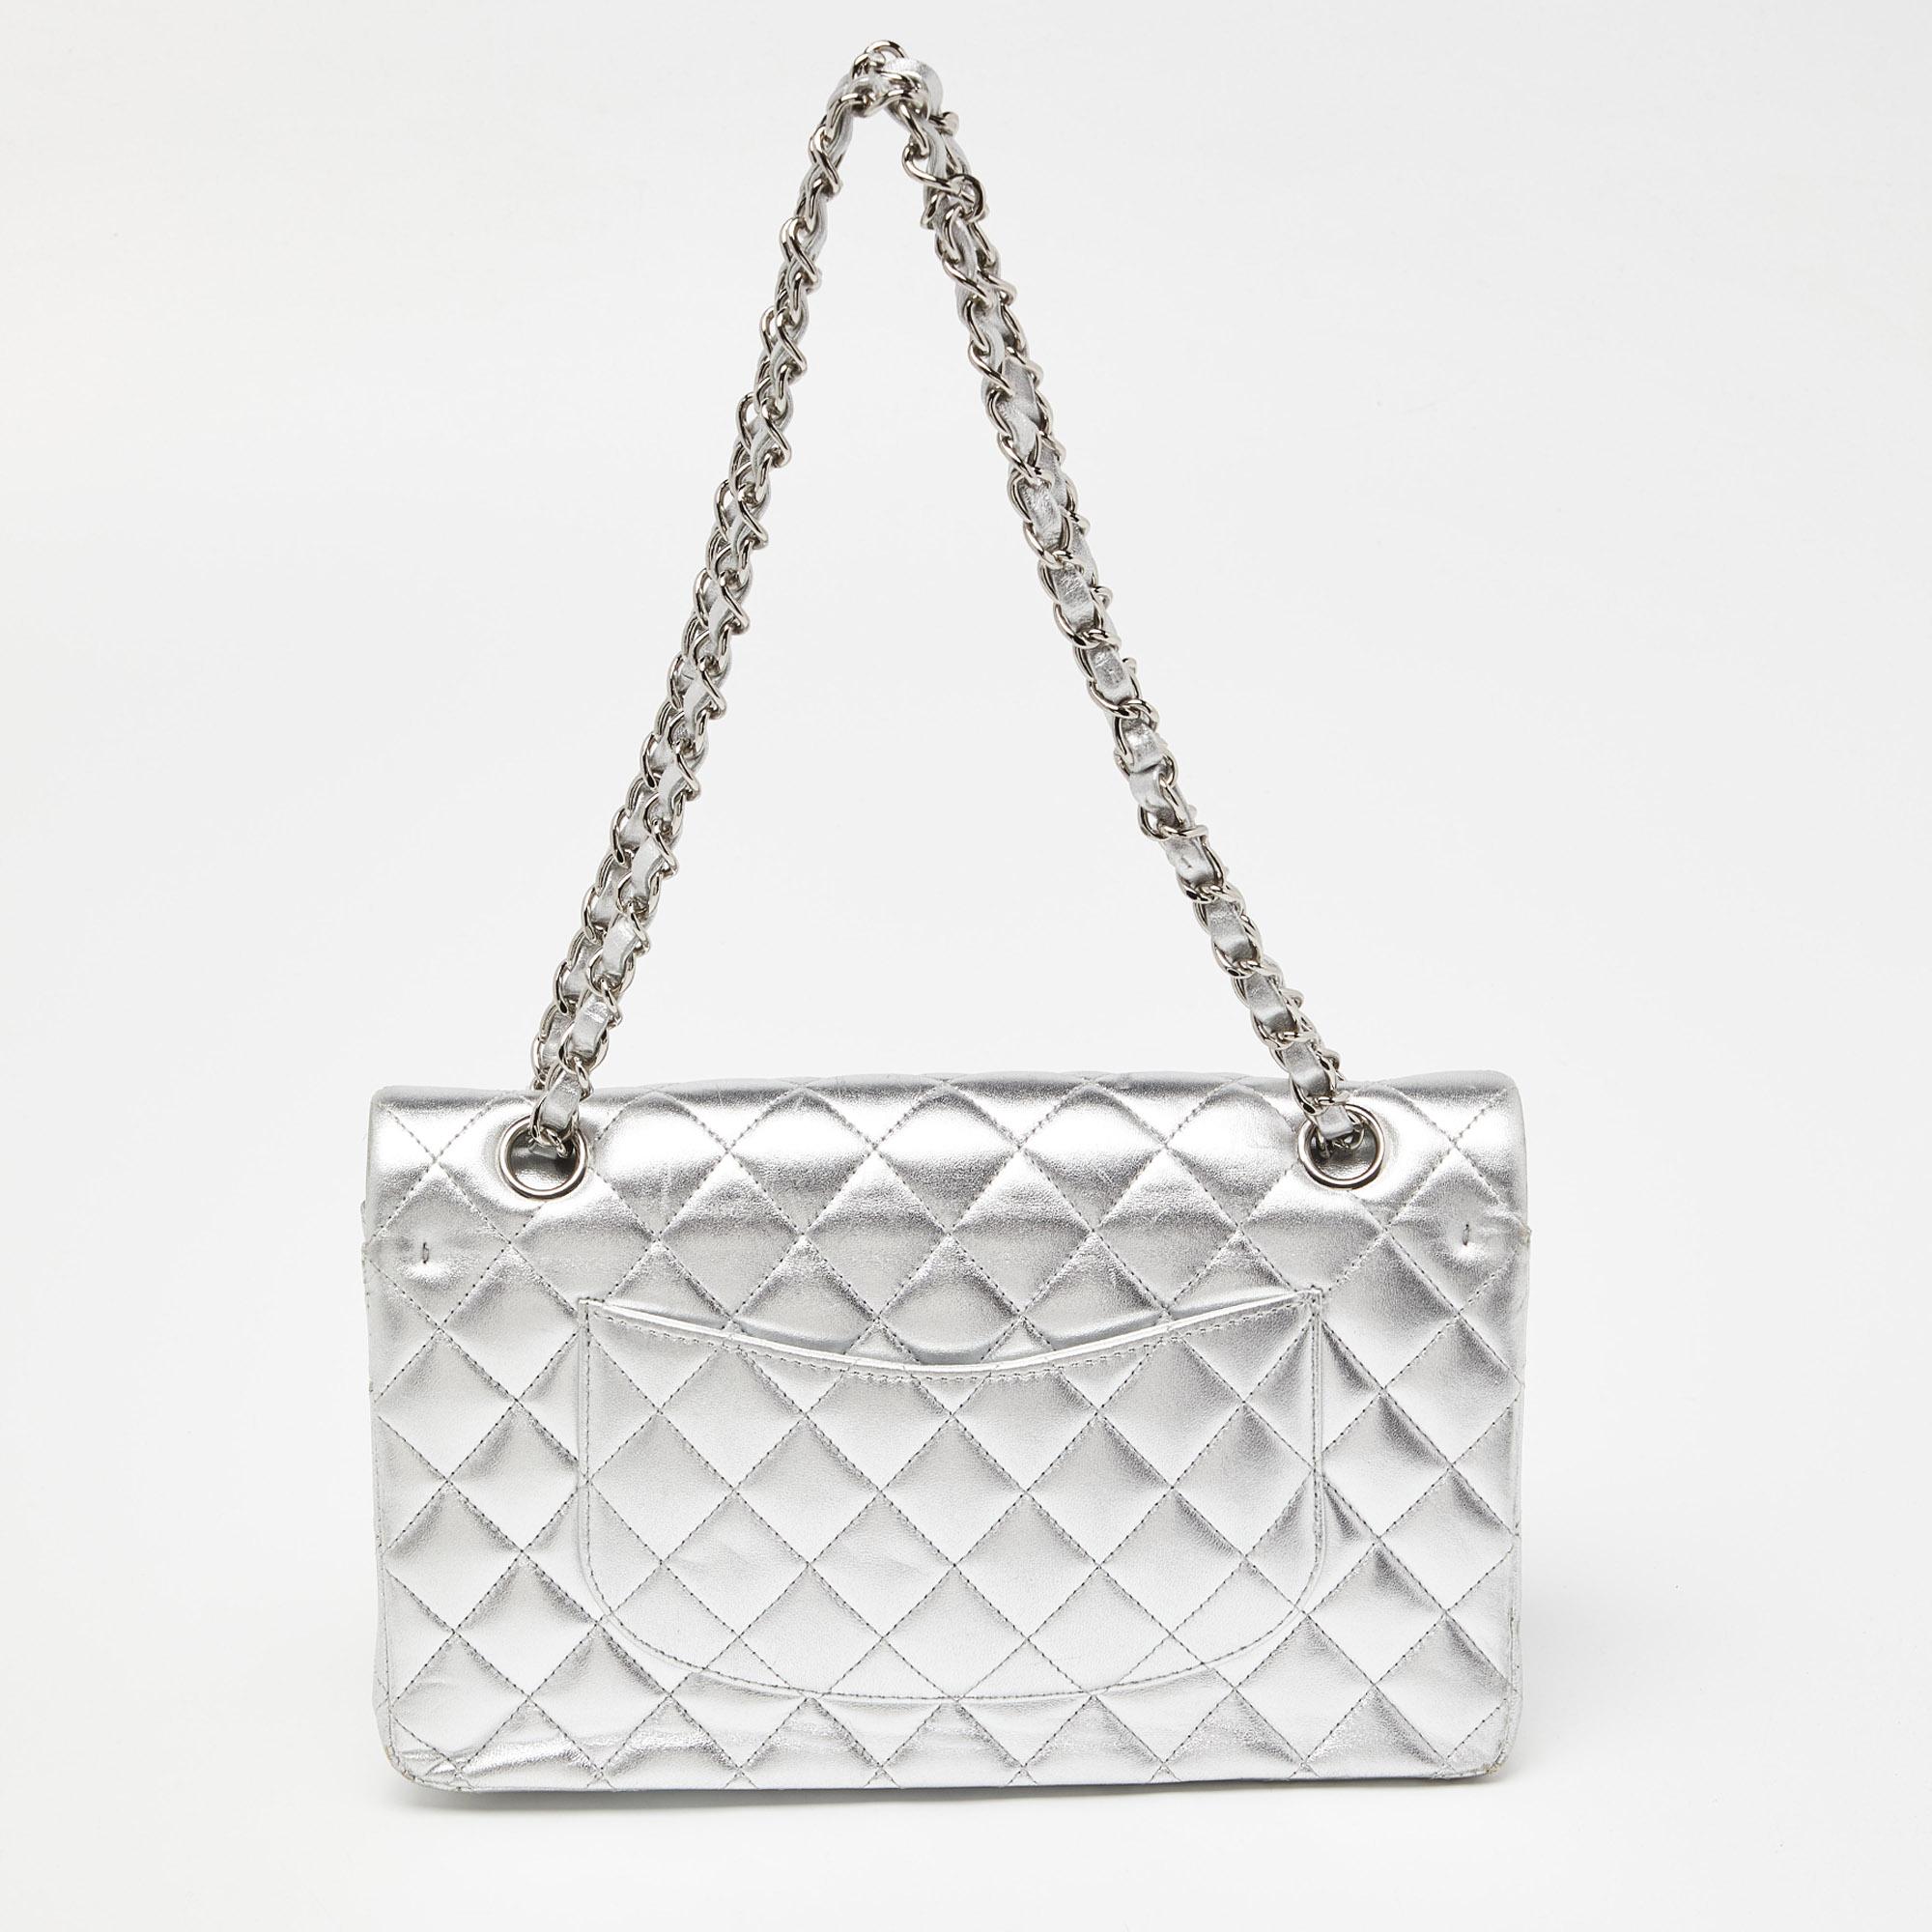 Chanel Silver Quilted Leather Medium Classic Double Flap Bag 5